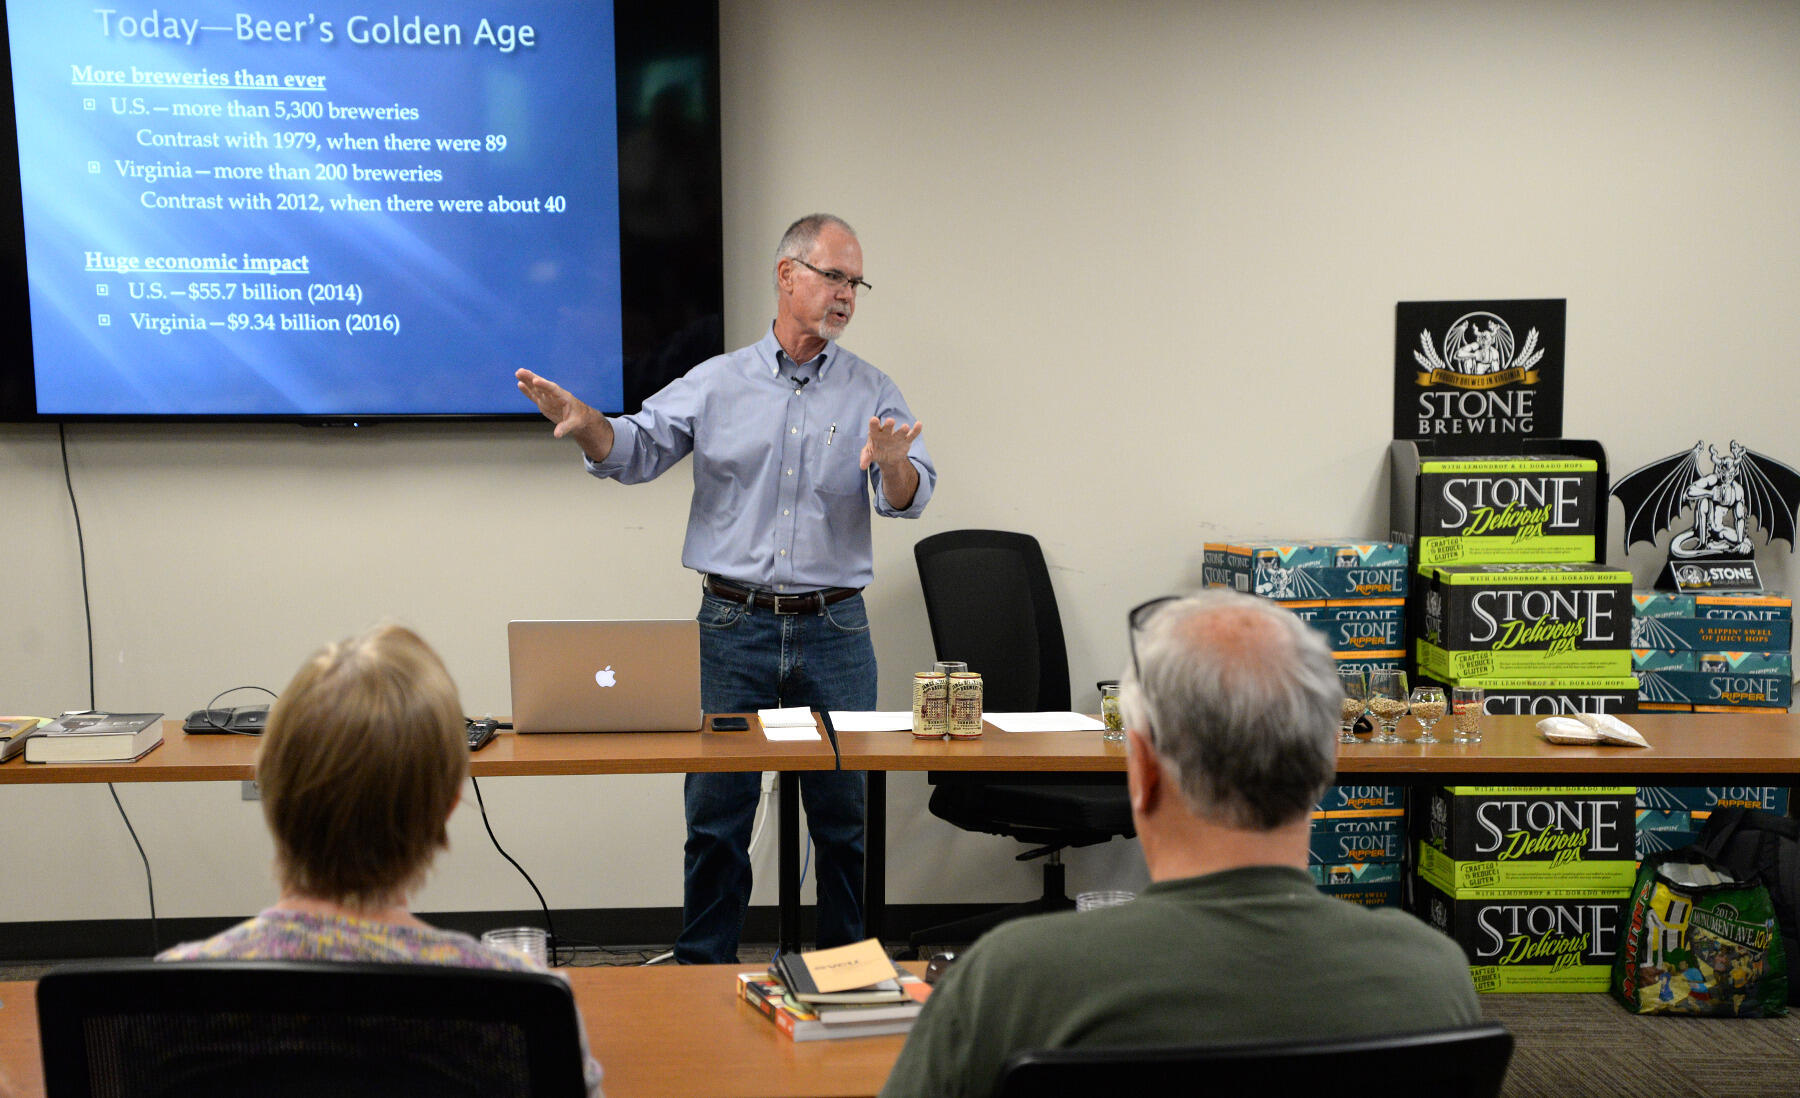 Lee Graves, a Richmond beer author, is teaching the introductory class, which is part of the VCU Office of Continuing and Professional Education’s new noncredit Craft Beer Certificate of Completion Program.